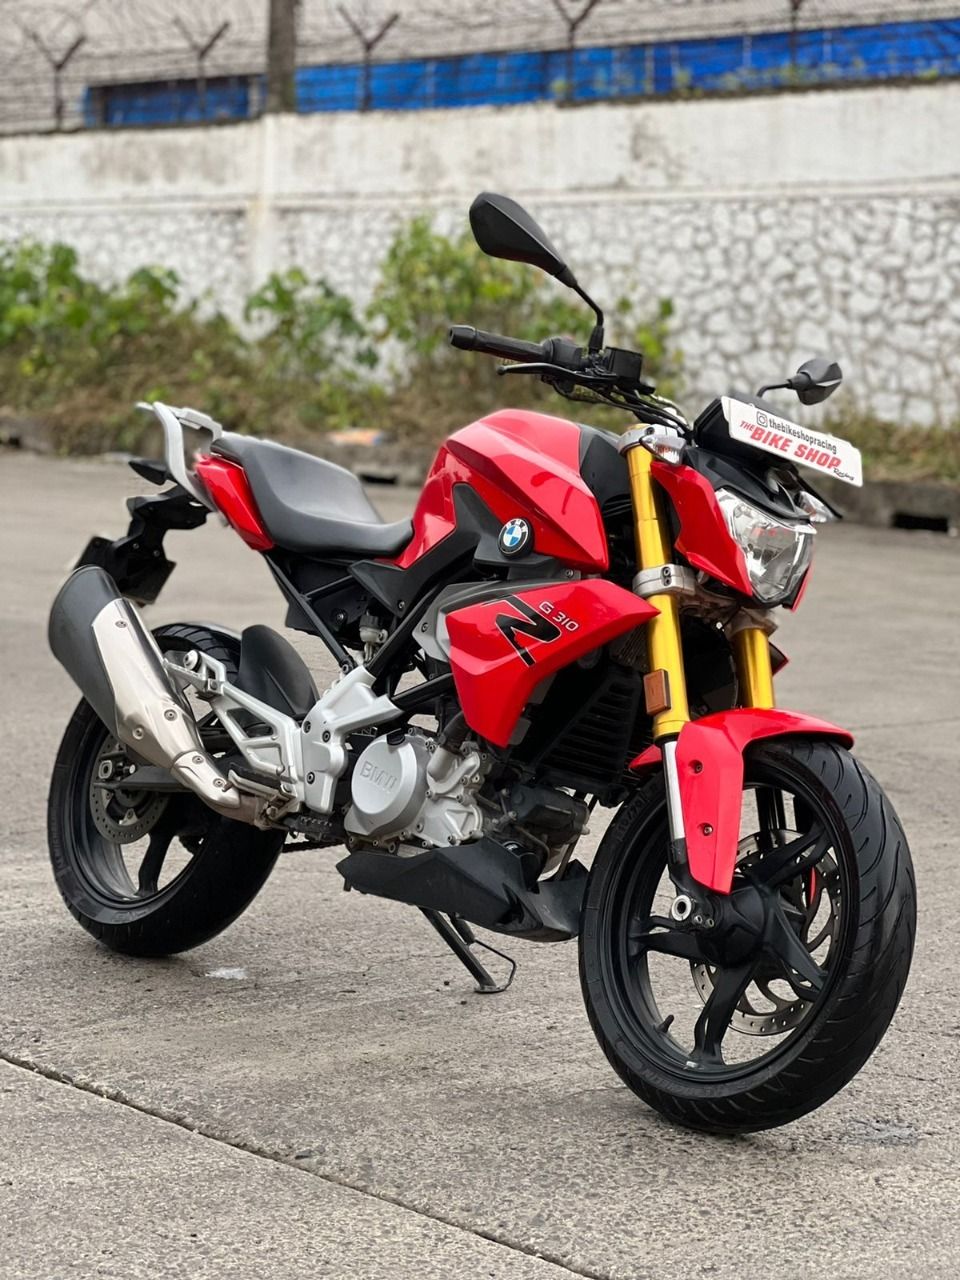 2018 BMW G 310R ABS (Racing red color)